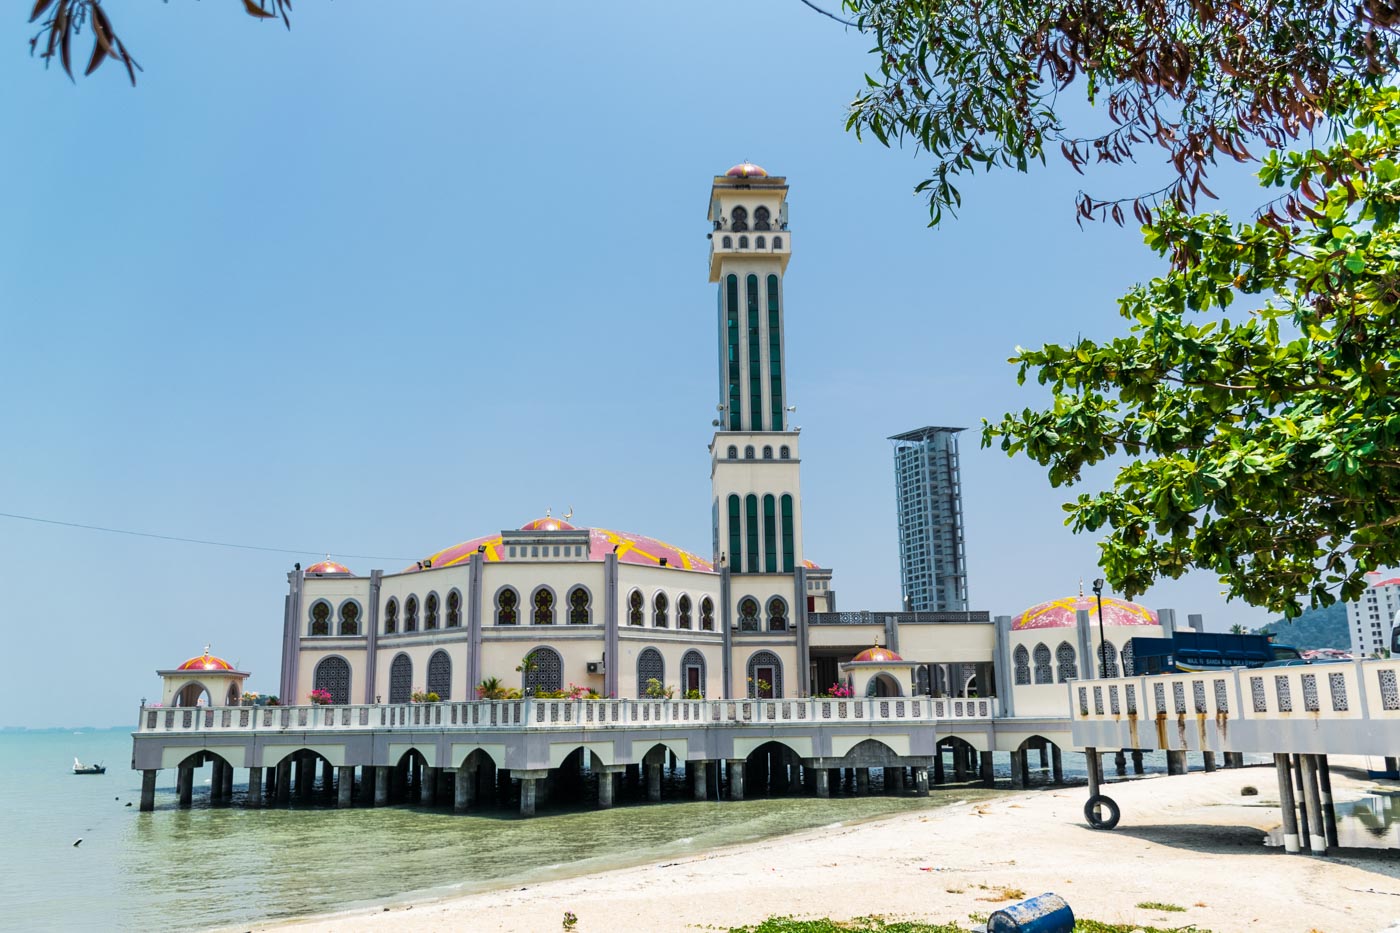 The mosque in Penang built on top of the water just by the beach